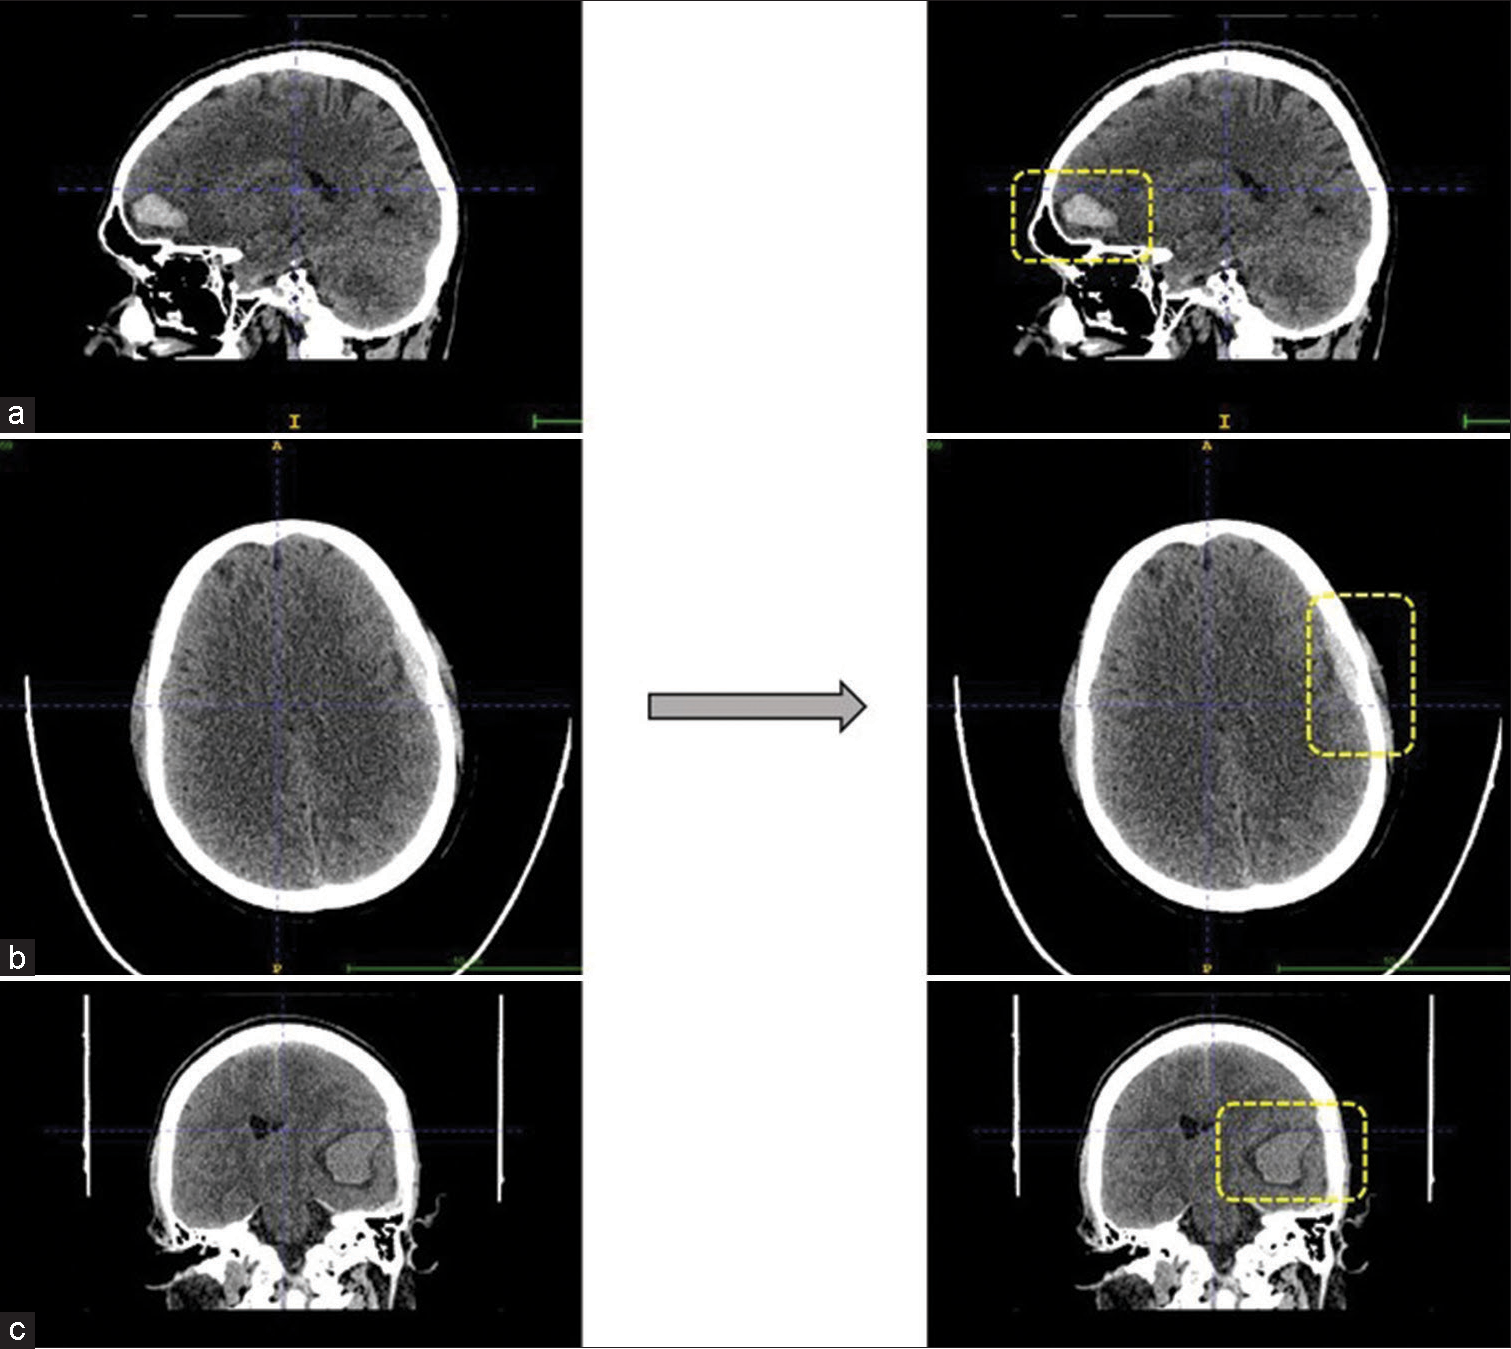 Predicted intracranial hemorrhage bounded by the boxes. (a and c) are intraparenchymal hemorrhages seen in sagittal and coronal view, respectively. Whereas (b) is example for microsubdural hemorrhage seen in axial view.